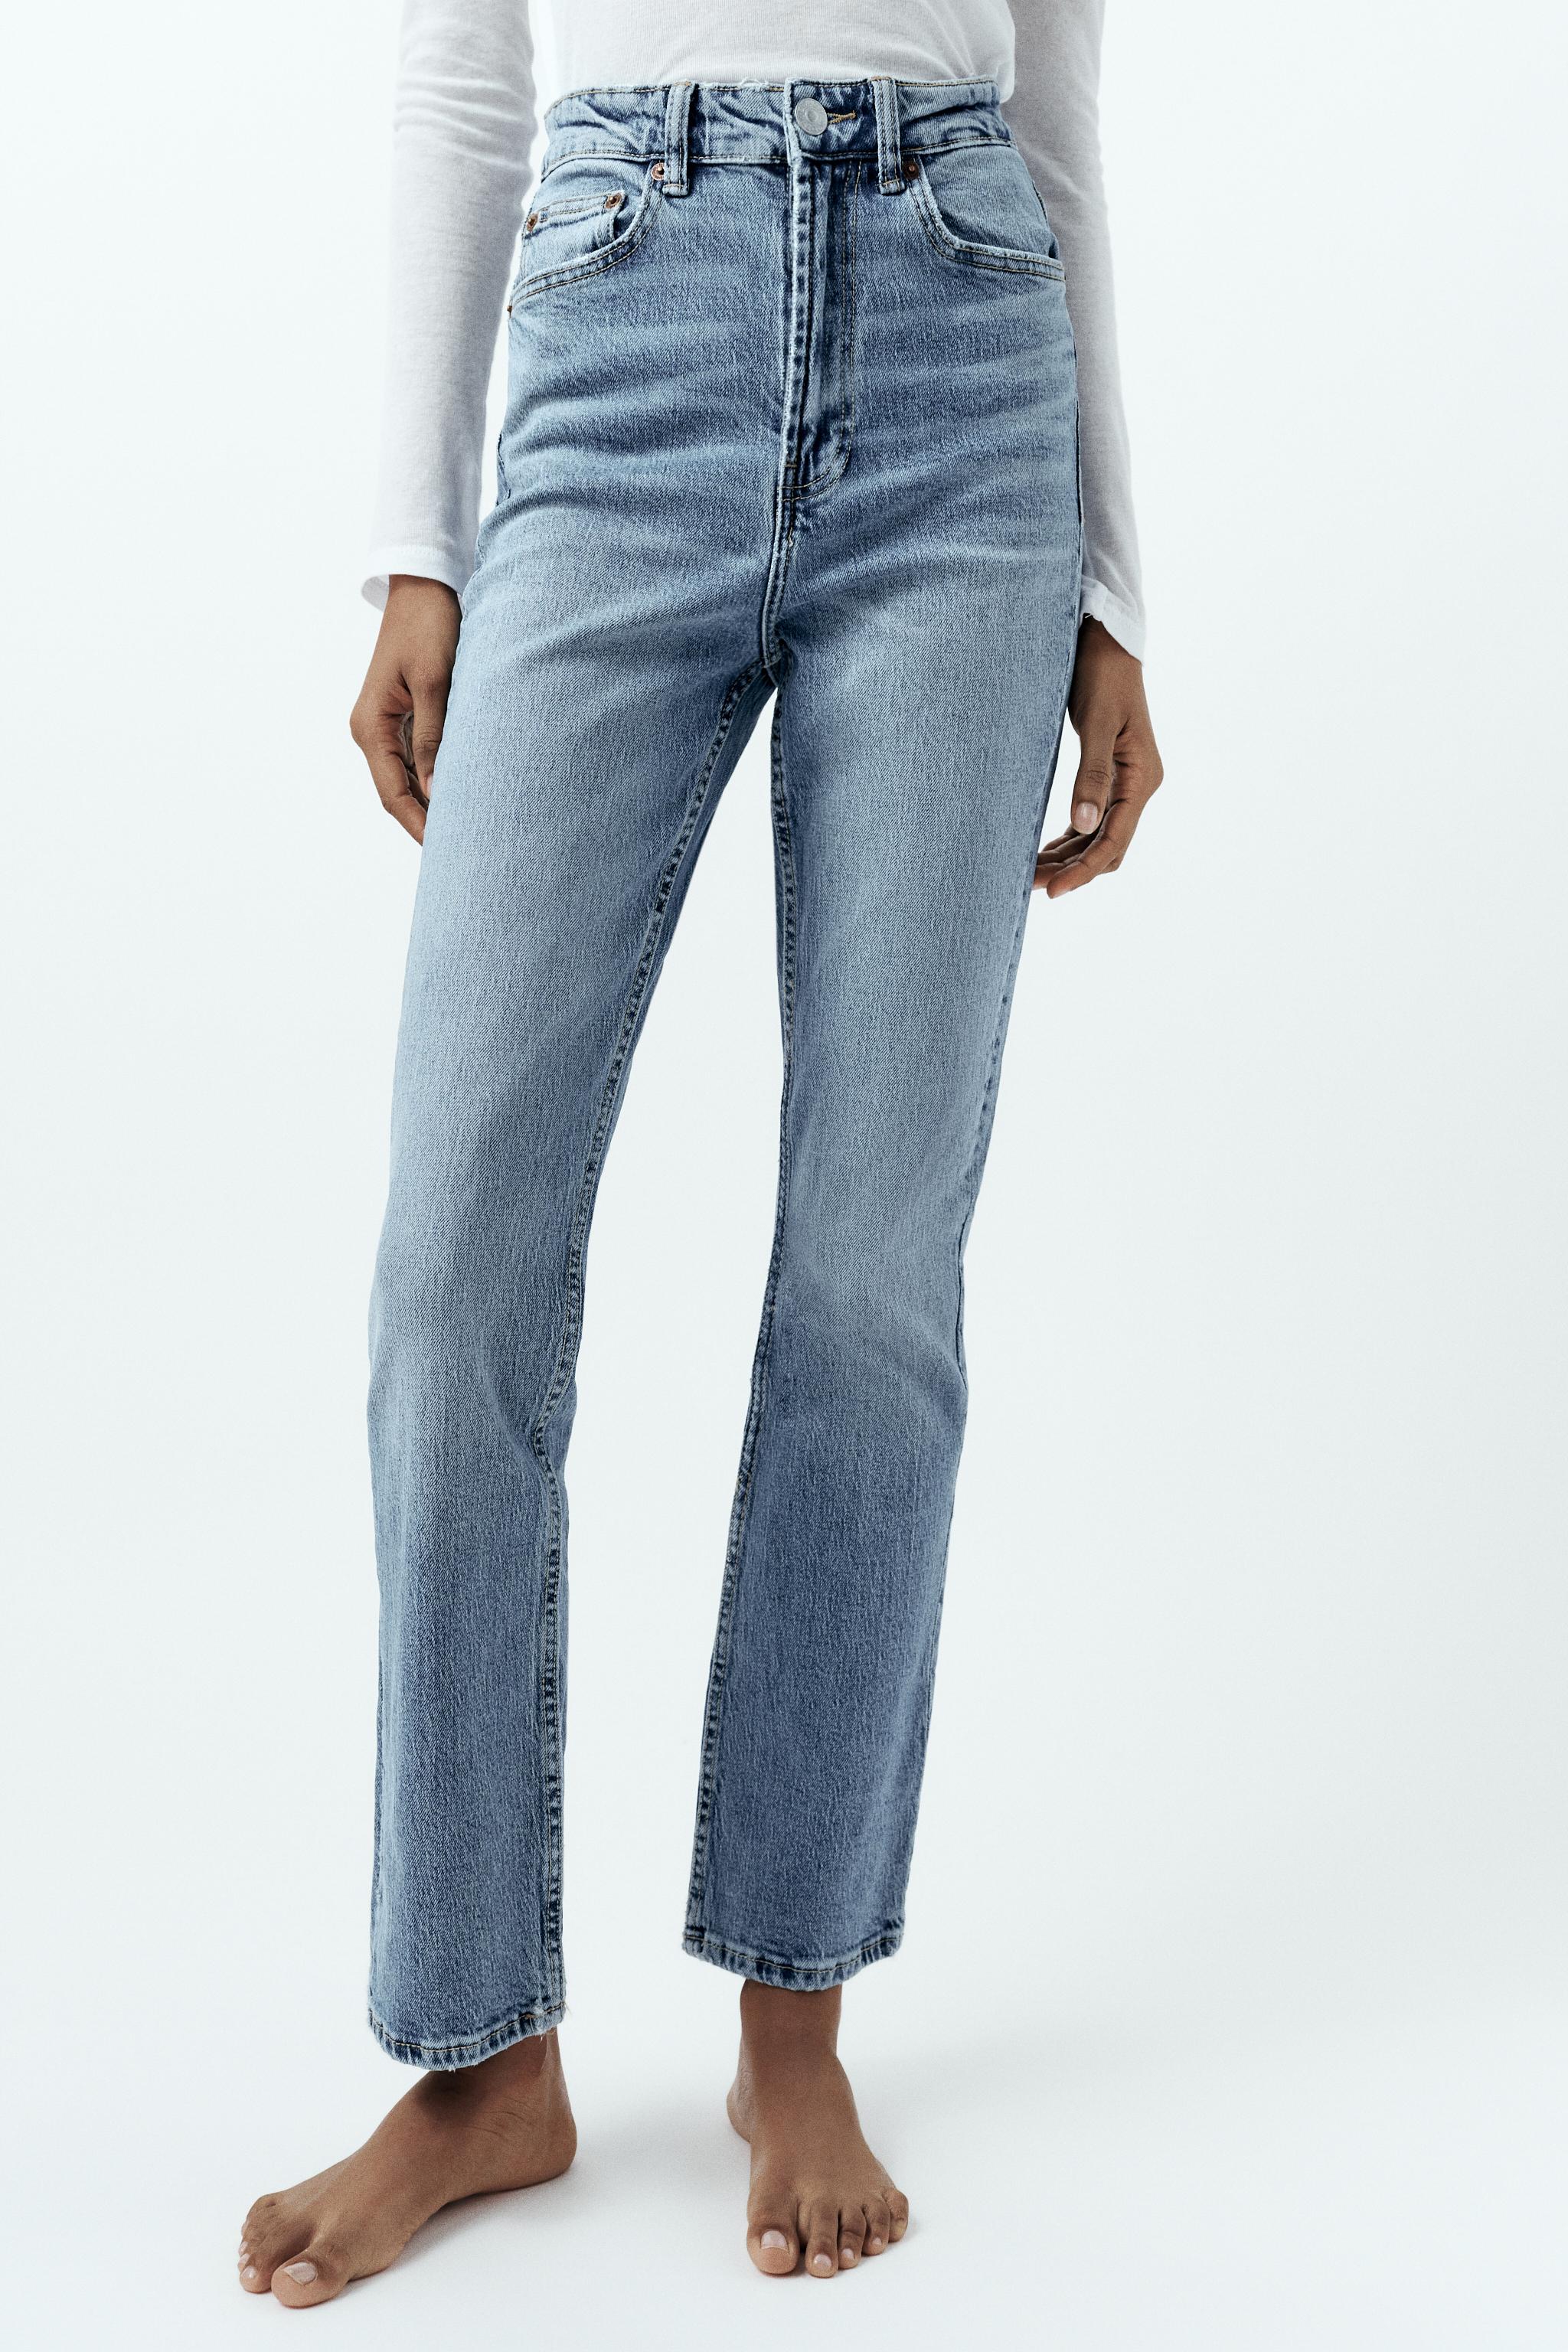 TRF STOVE PIPE JEANS WITH A HIGH WAIST - Blue | ZARA United States